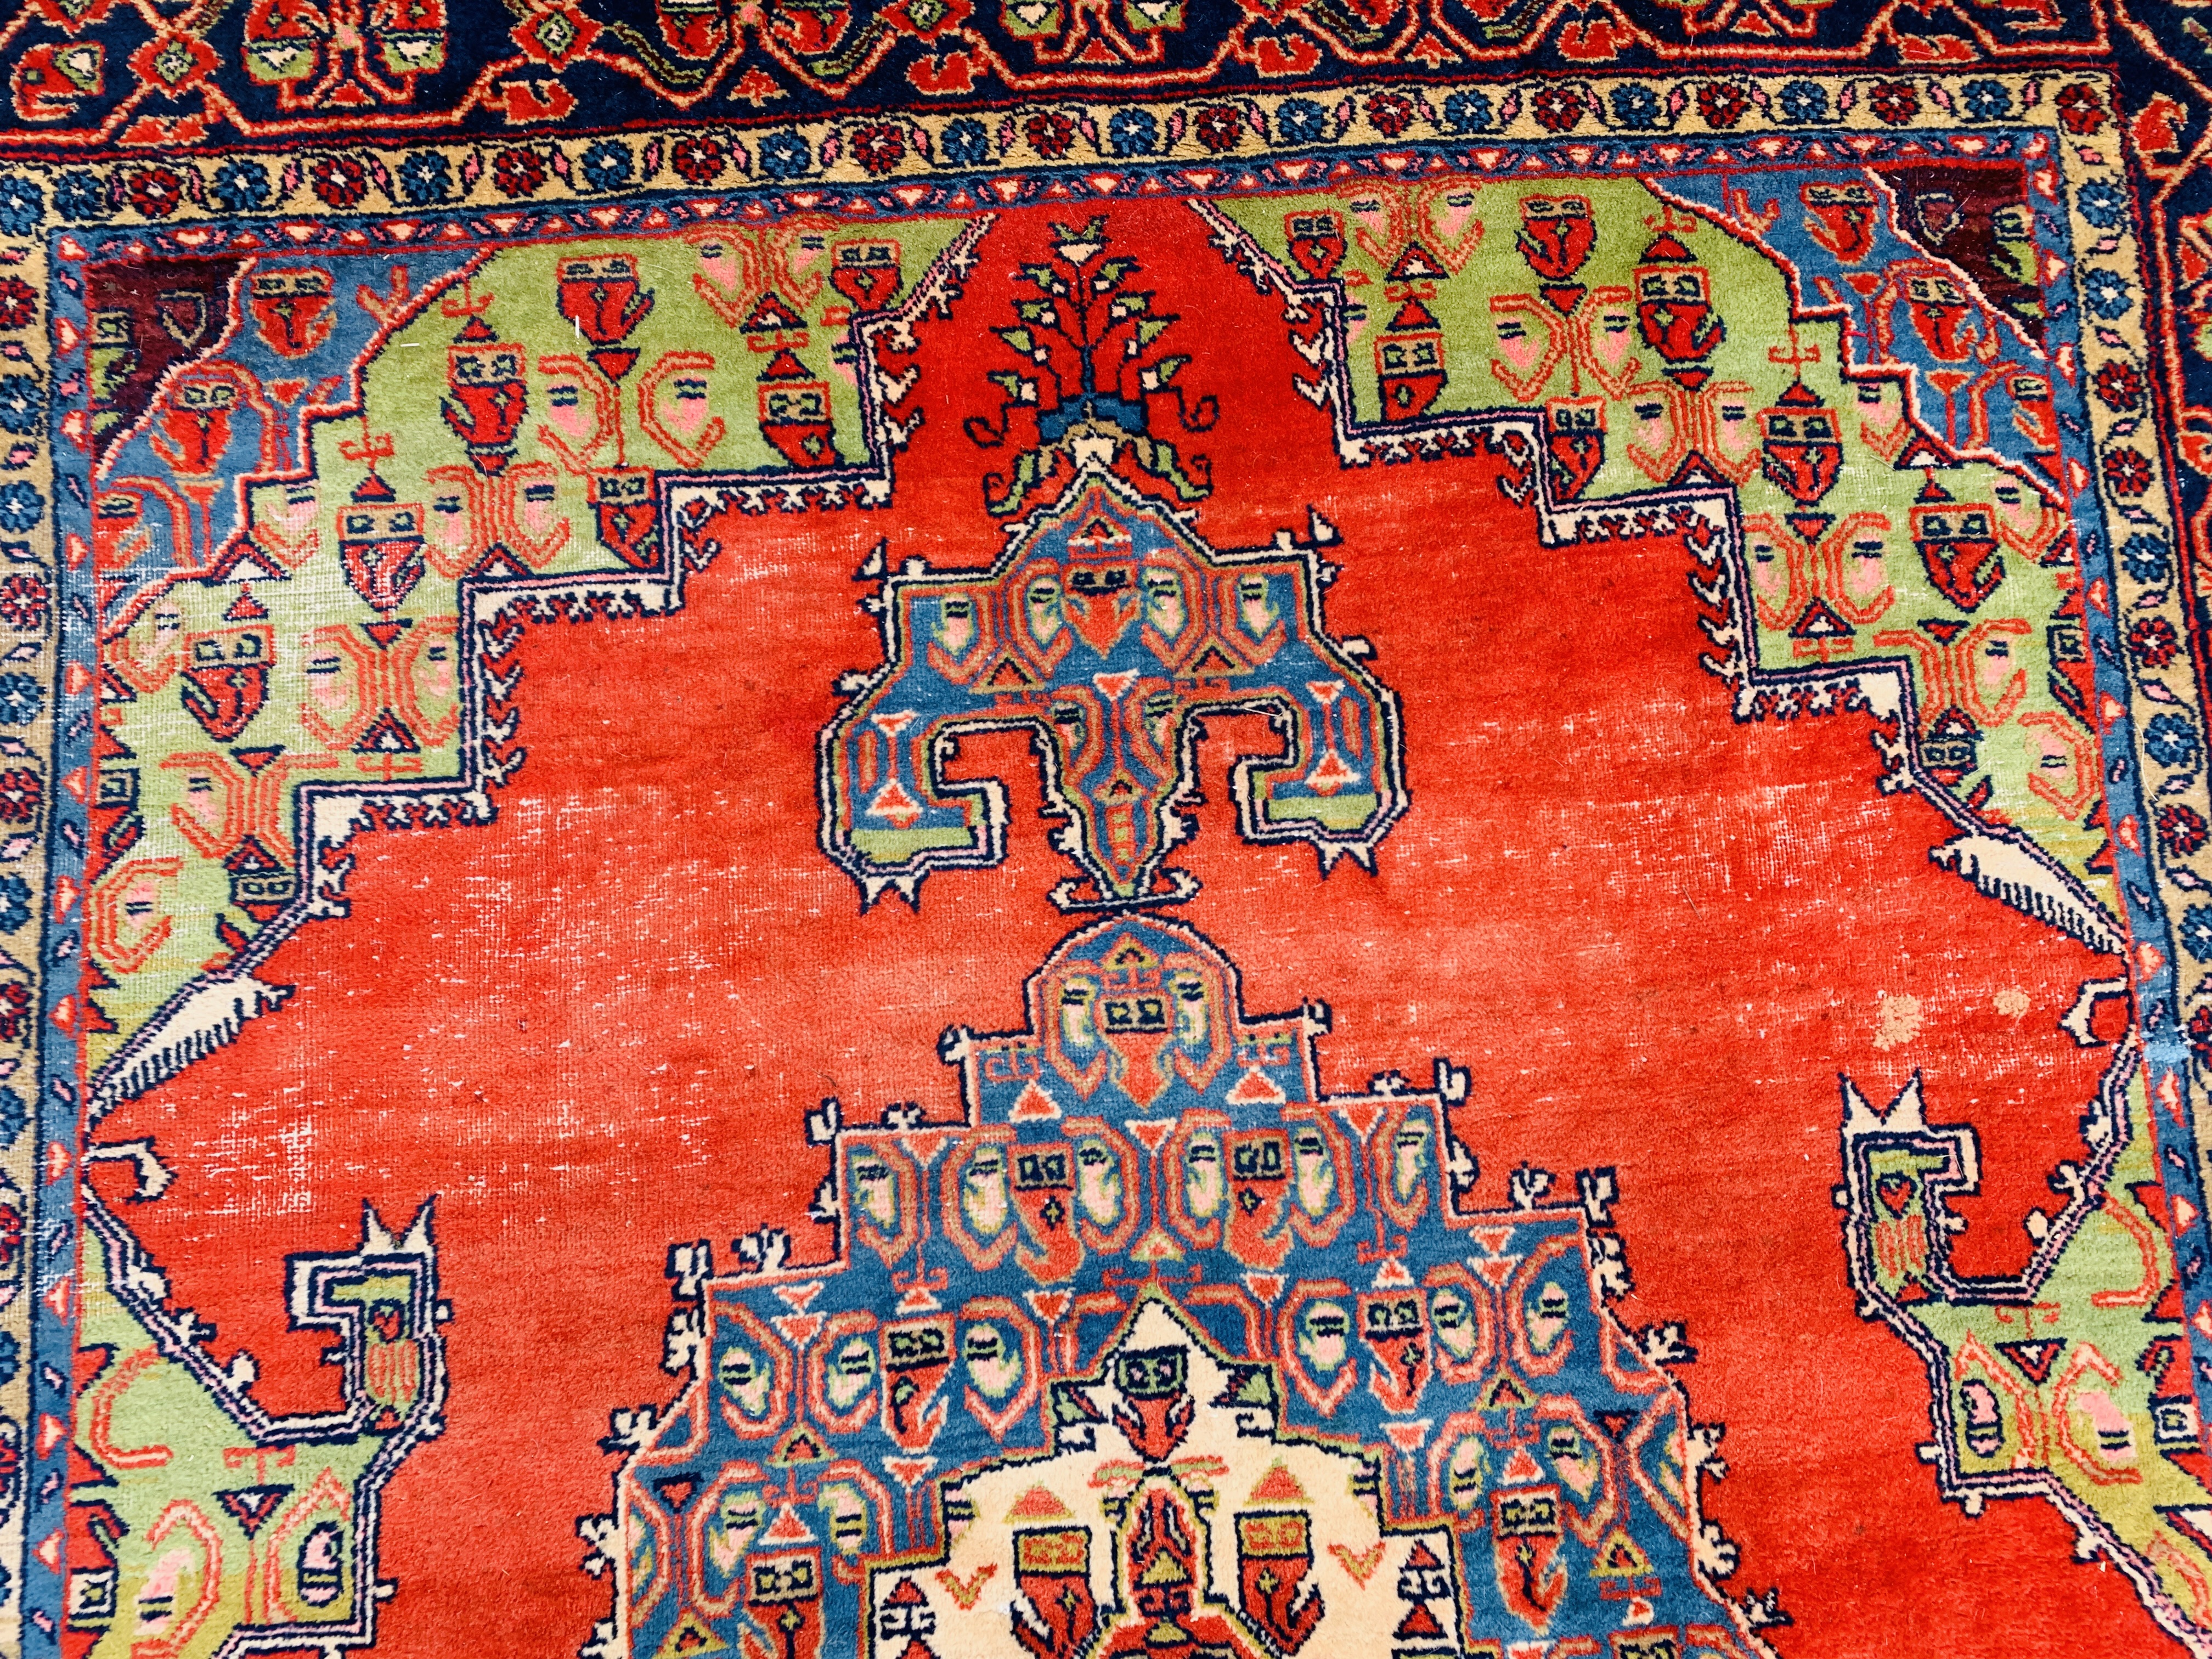 A GOOD QUALITY RED / BLUE PATTERNED EASTERN CARPET 3.3M X 3.15M. - Image 10 of 11